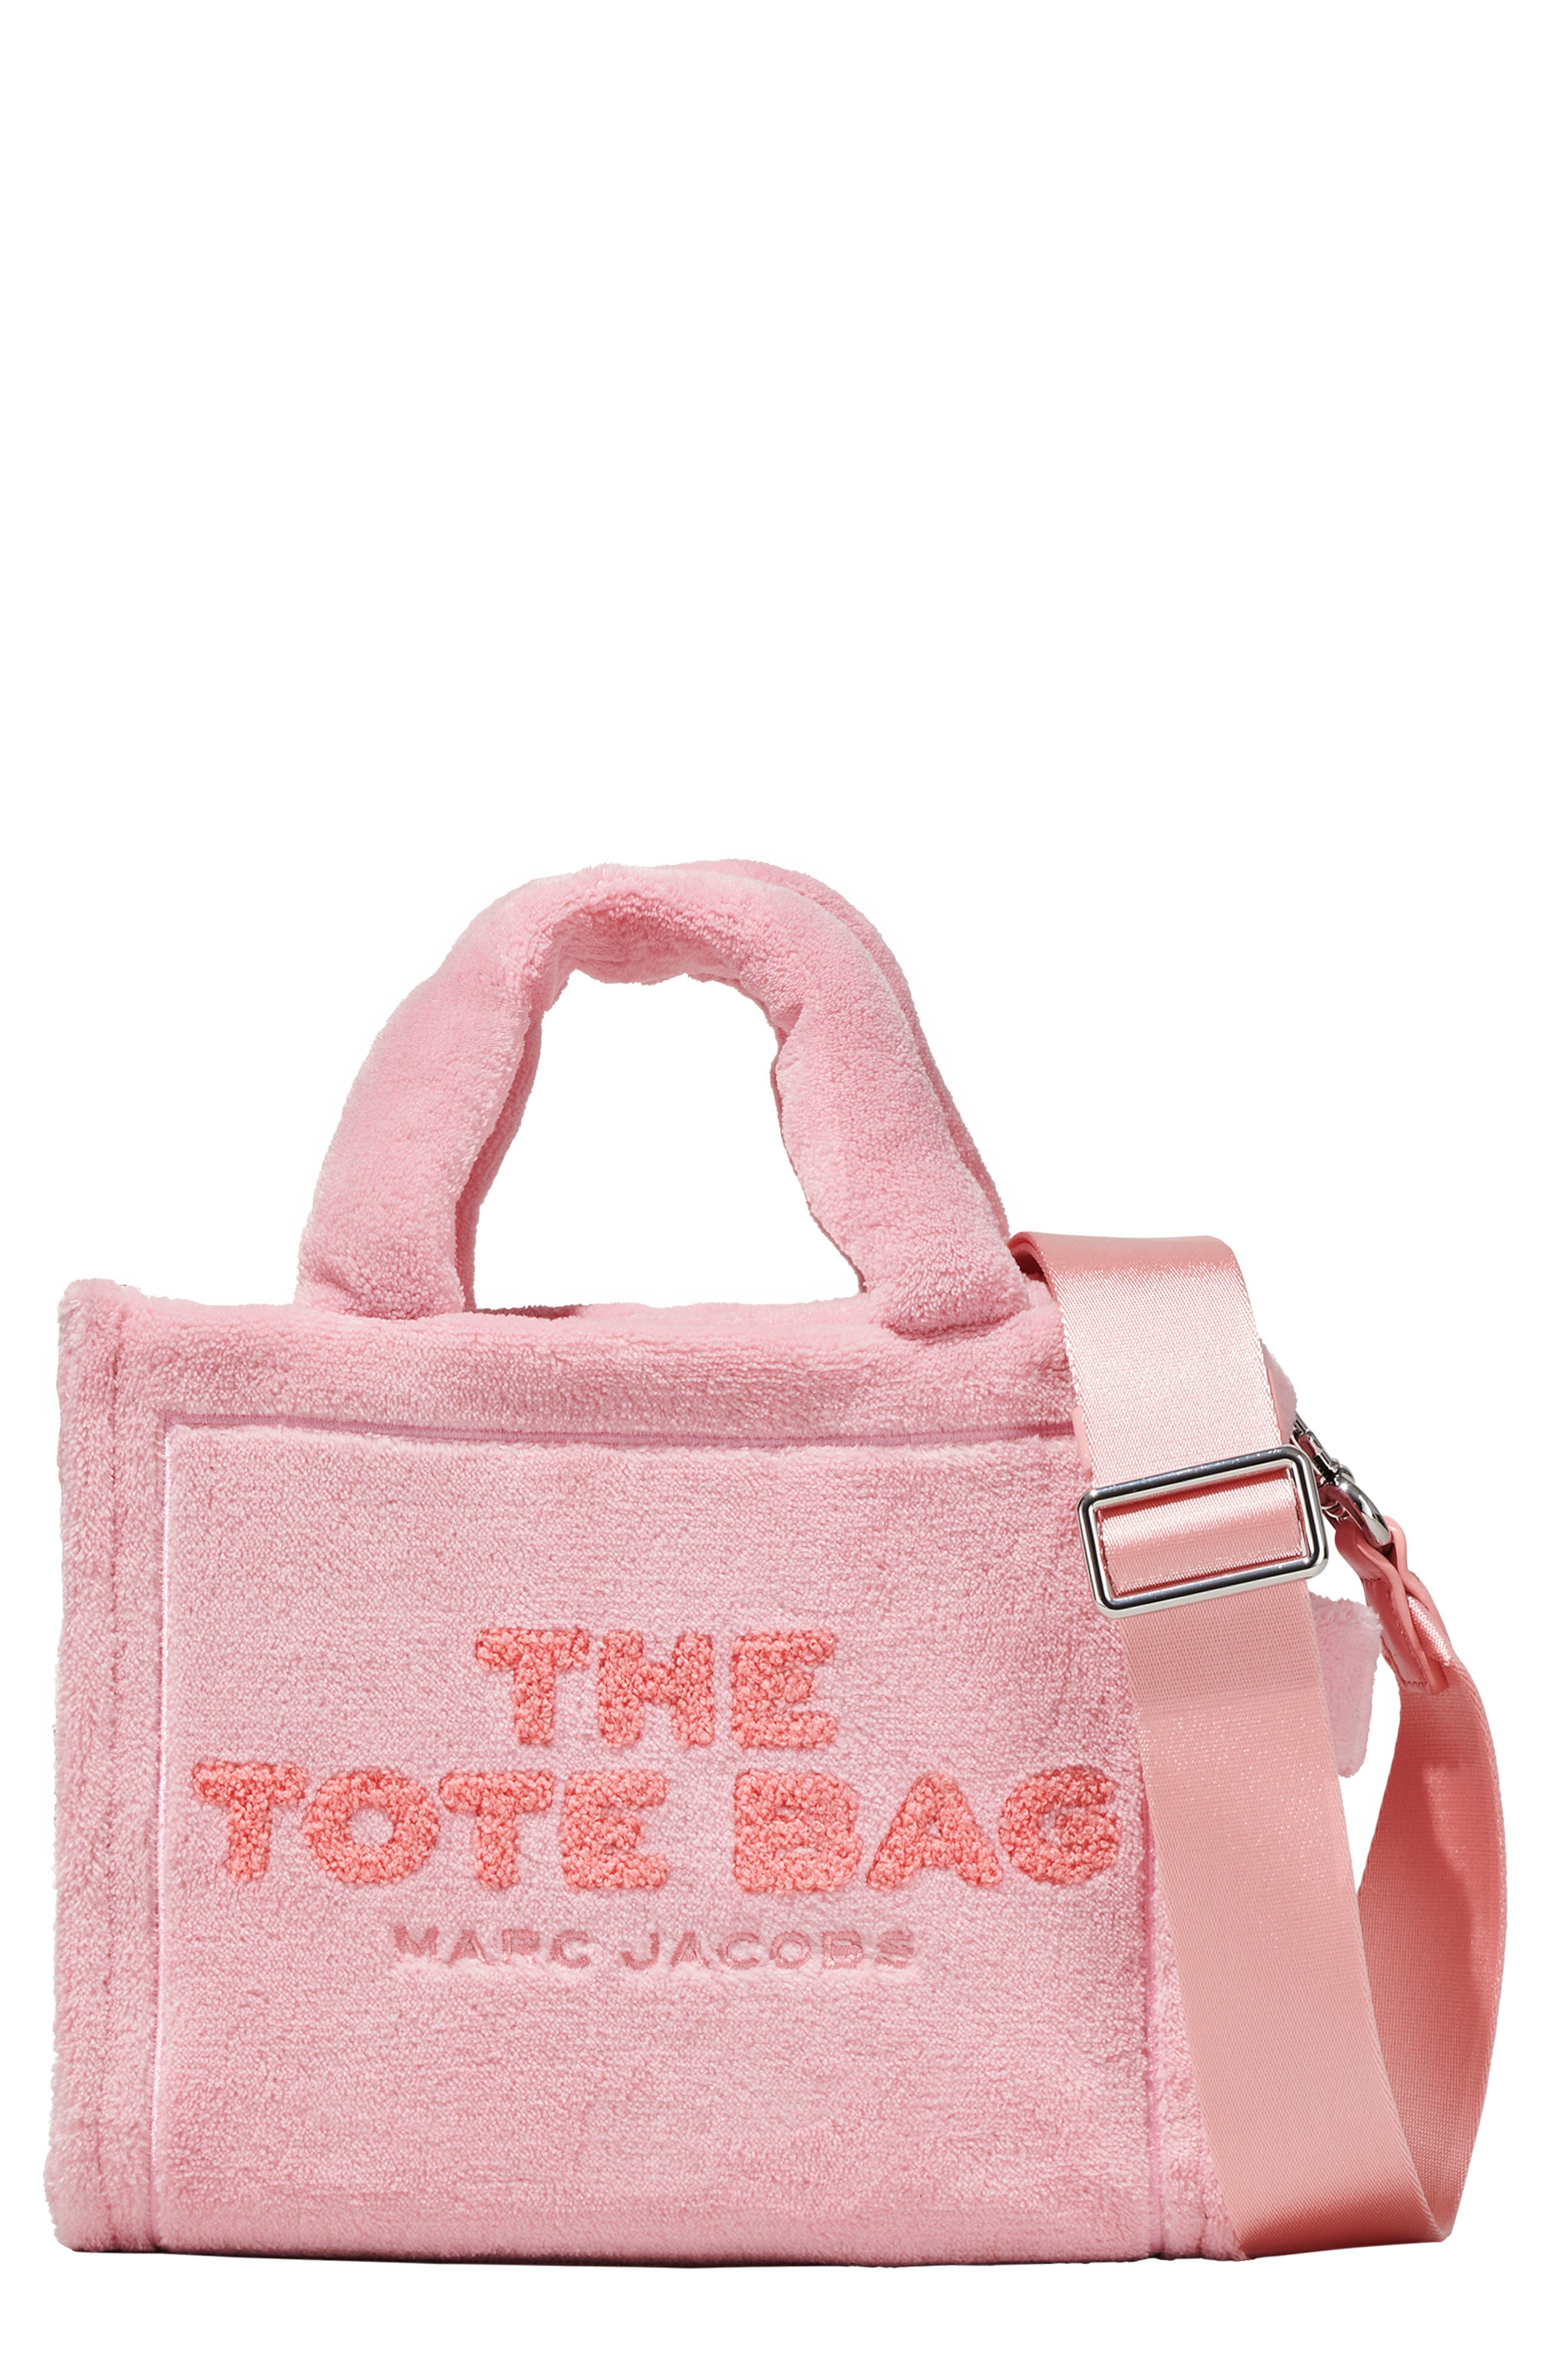 Marc Jacobs The Small Traveler Terry Tote in Light Pink